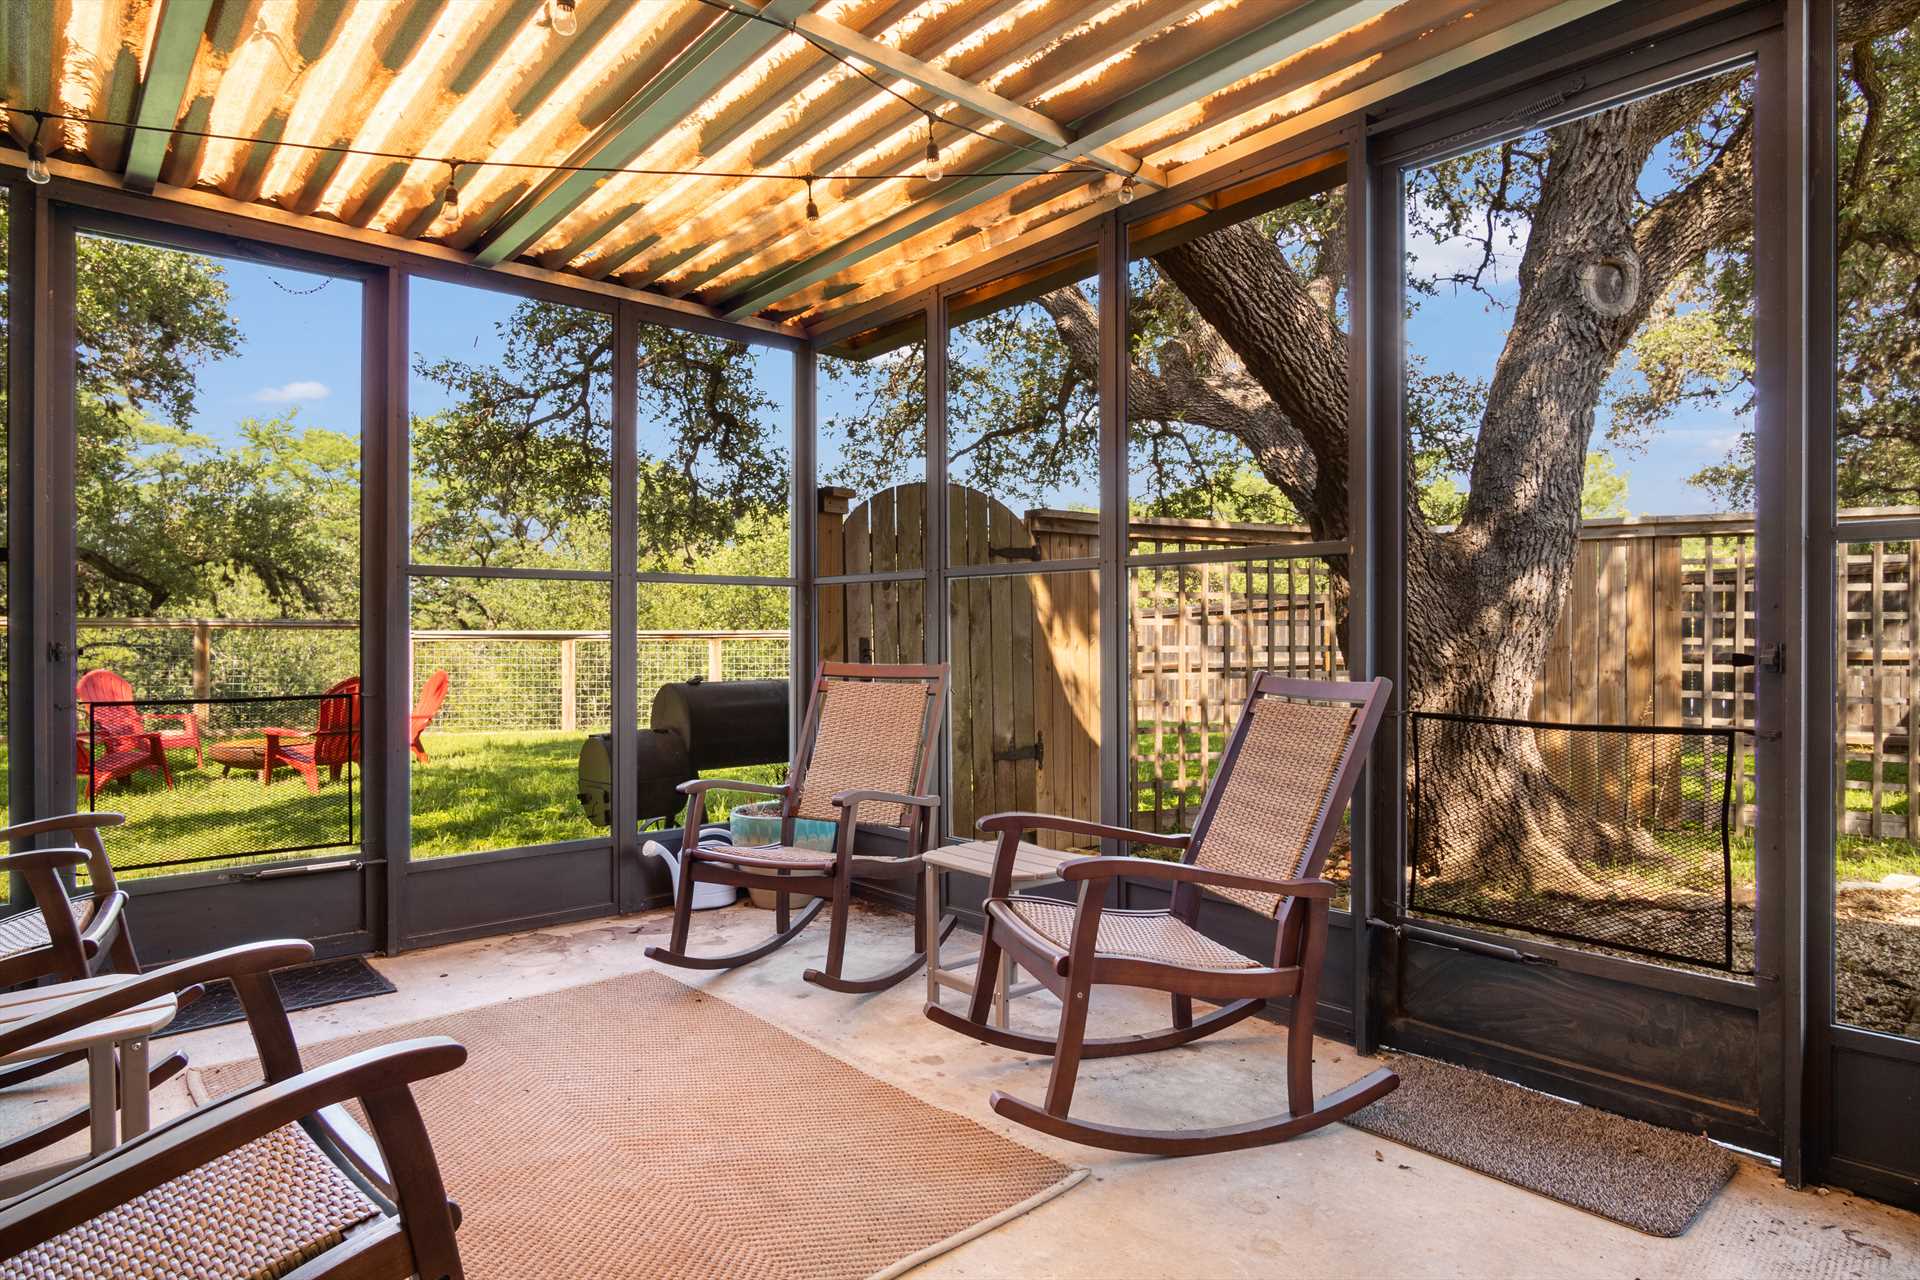                                                 The screened porch lets the Hill Country breezes in while keeping the critters out!